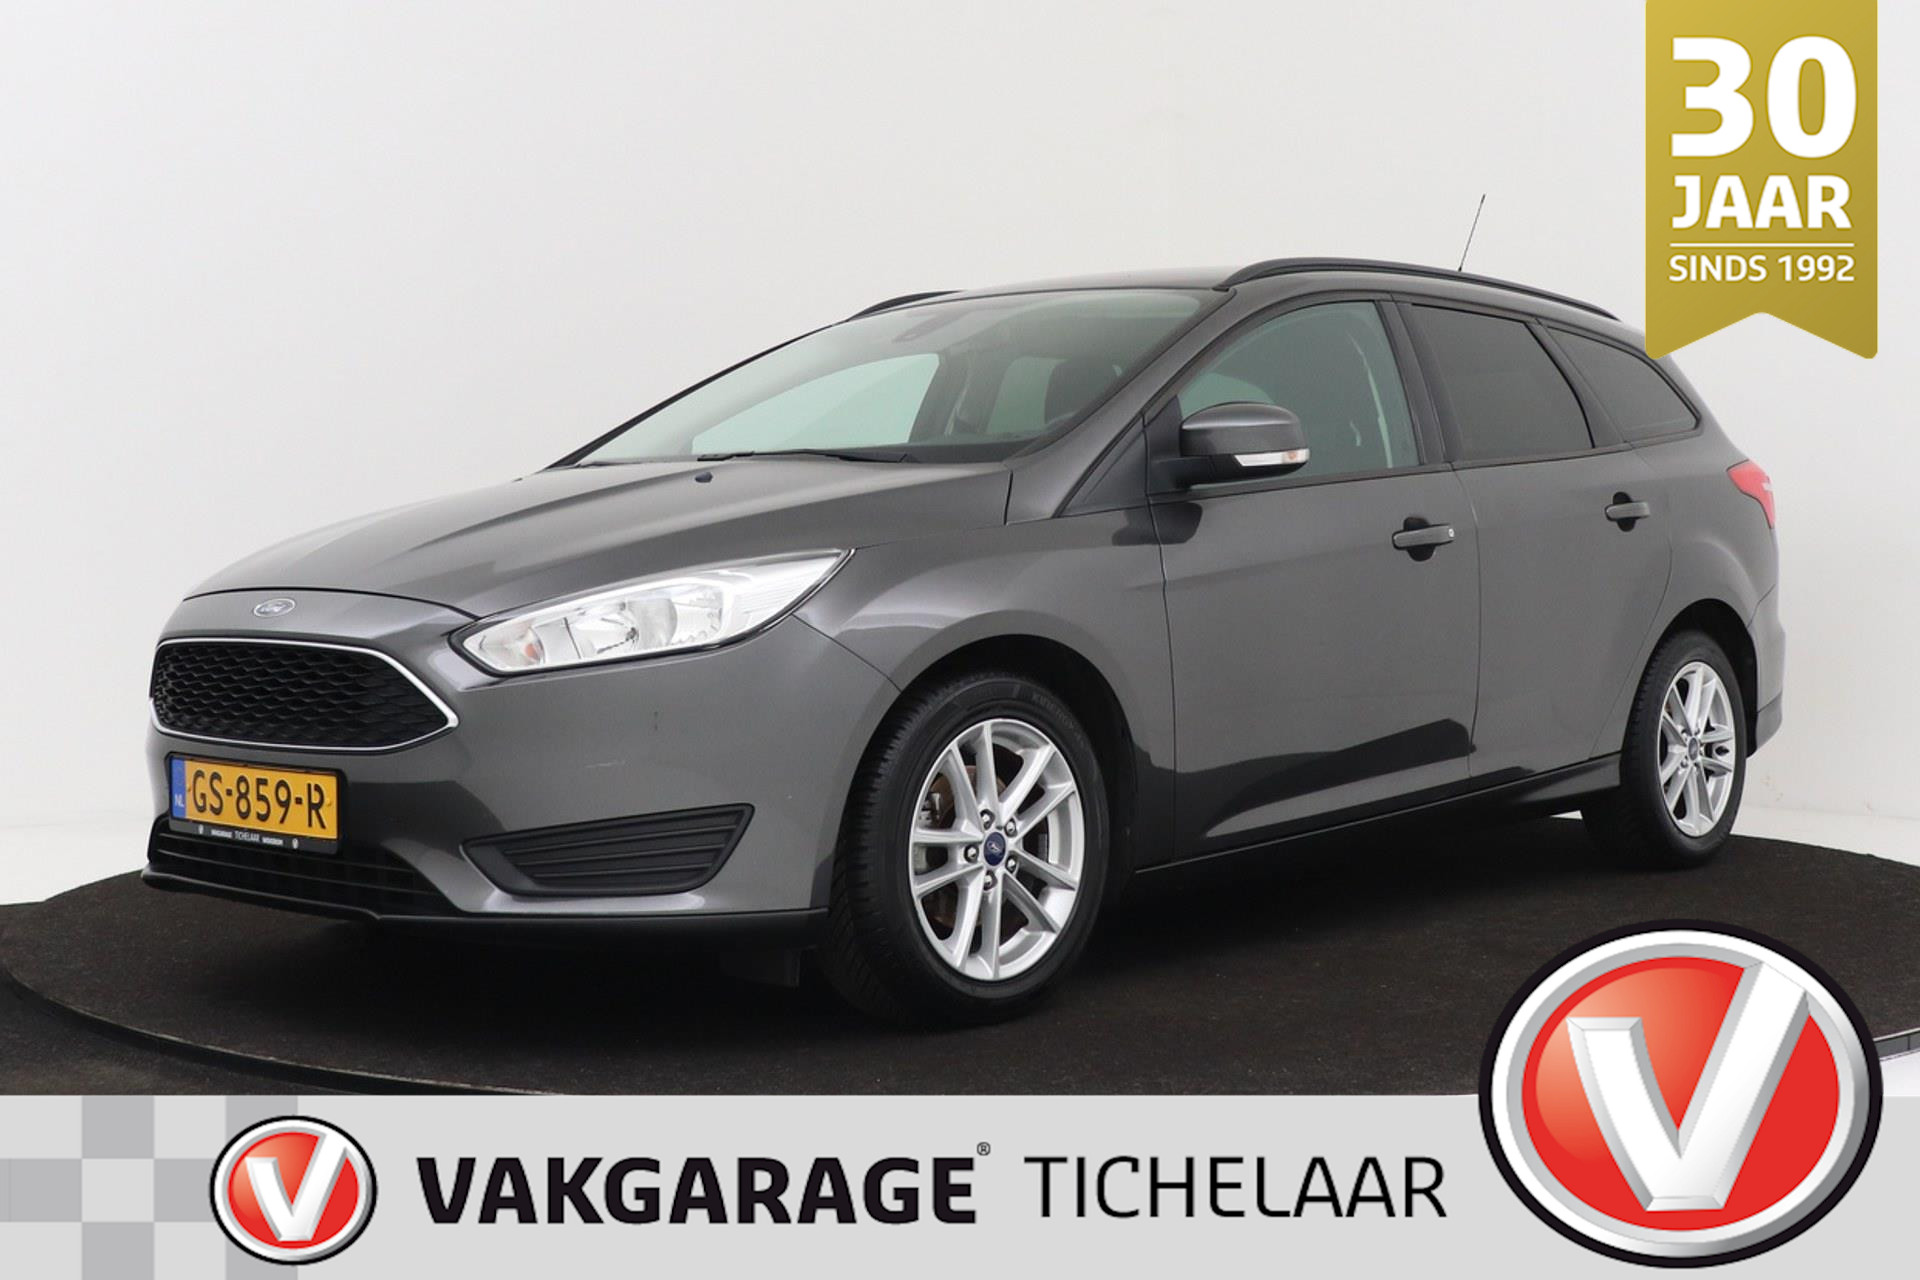 Ford Focus Wagon 1.0 Trend Edition | Org NL | Volledig Ond. | Airco | Cruise Control |